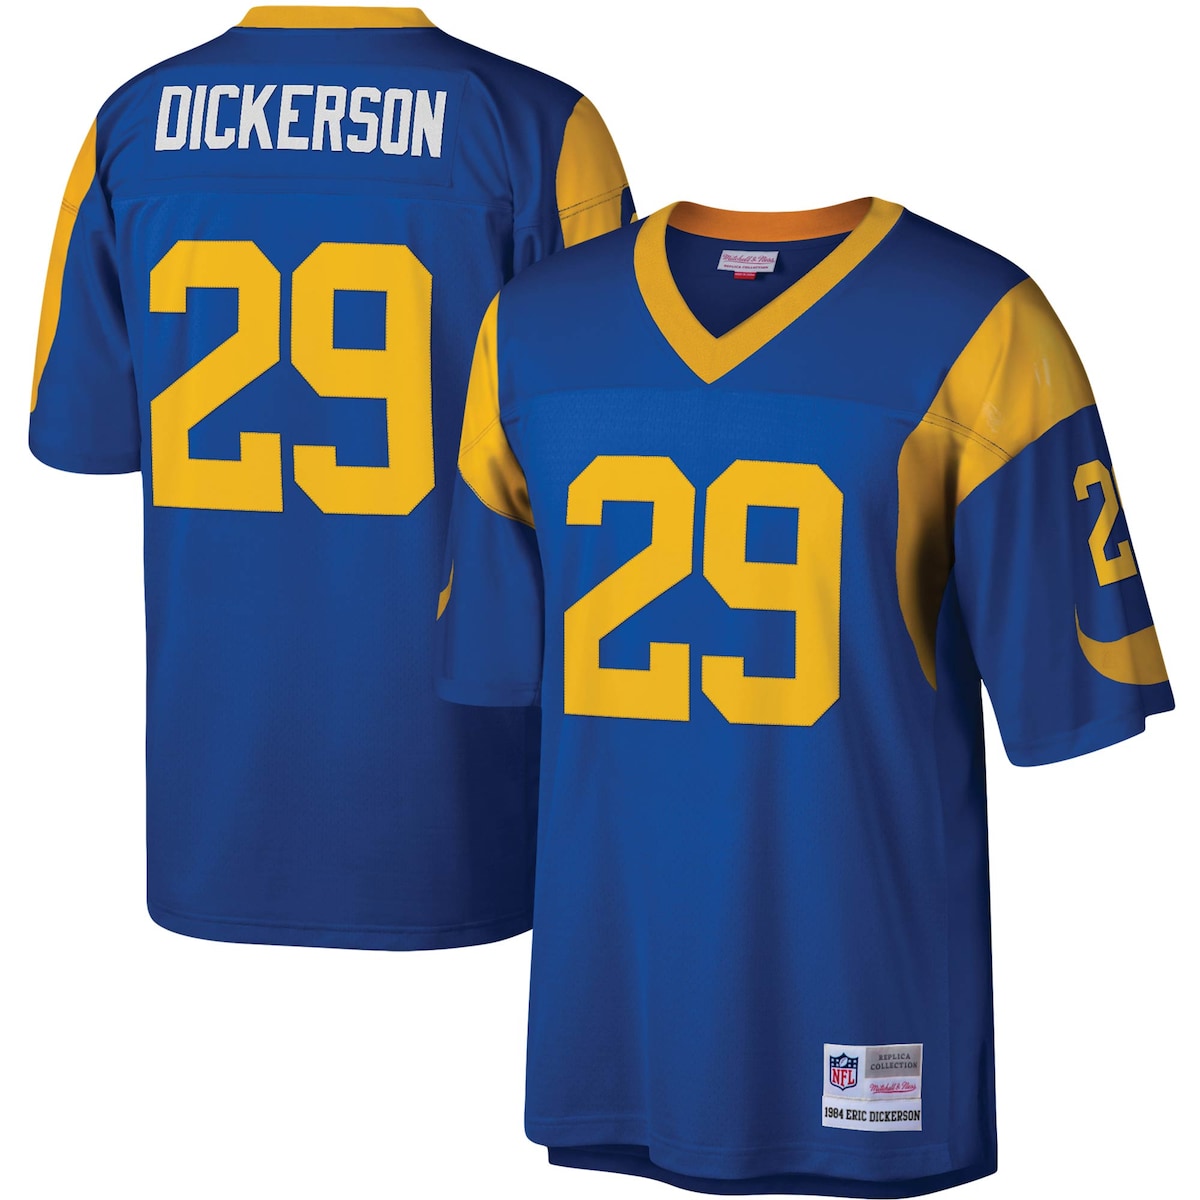 You're a massive Los Angeles Rams fan and also loved watching Eric Dickerson play. Now you can show off your fandom for both when you get this Eric Dickerson Los Angeles Rams Legacy replica jersey from Mitchell & Ness. It features distinctive throwback Los Angeles Rams graphics on the chest and back, perfect for wearing at a home game. By wearing this jersey, you'll be able to feel like you're reliving some of the great plays that Eric Dickerson accomplished to lead the Los Angeles Rams to glory.Short sleevesMachine wash, line dryOfficially licensedMaterial: 100% PolyesterSide splits at waist hemFabric applique sewn onEmbroidered NFL Shield at collarWoven tags at bottom hemMesh fabricSublimated rib-knit sleeve insertsEmbroidered twill graphicsImportedReplicaV-neckBrand: Mitchell & Ness